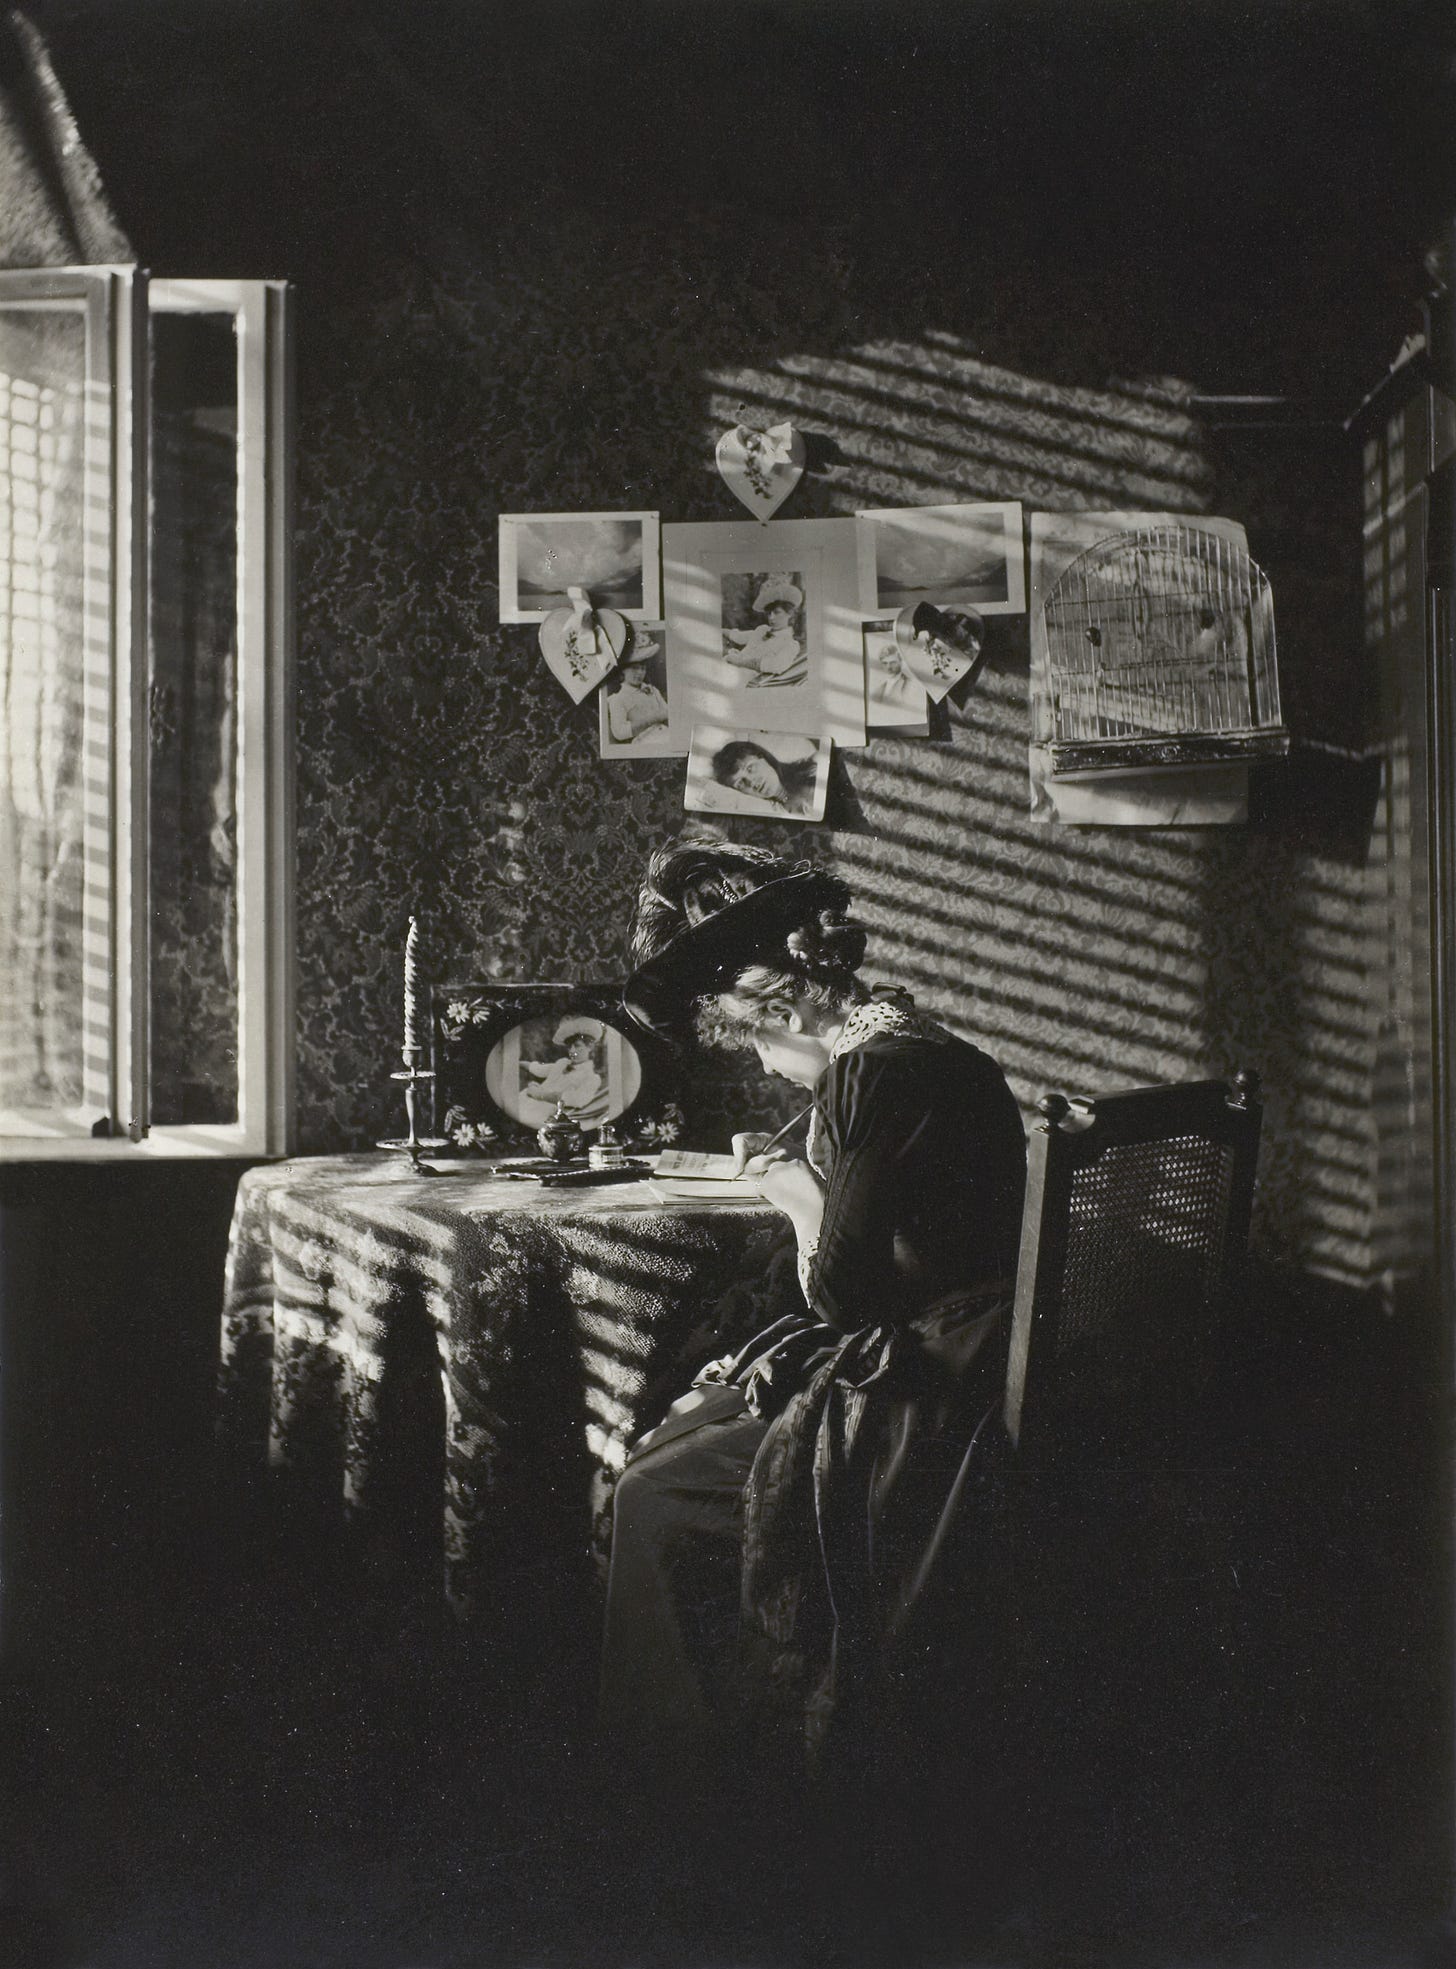 Photograph in black and white of woman writing at a desk